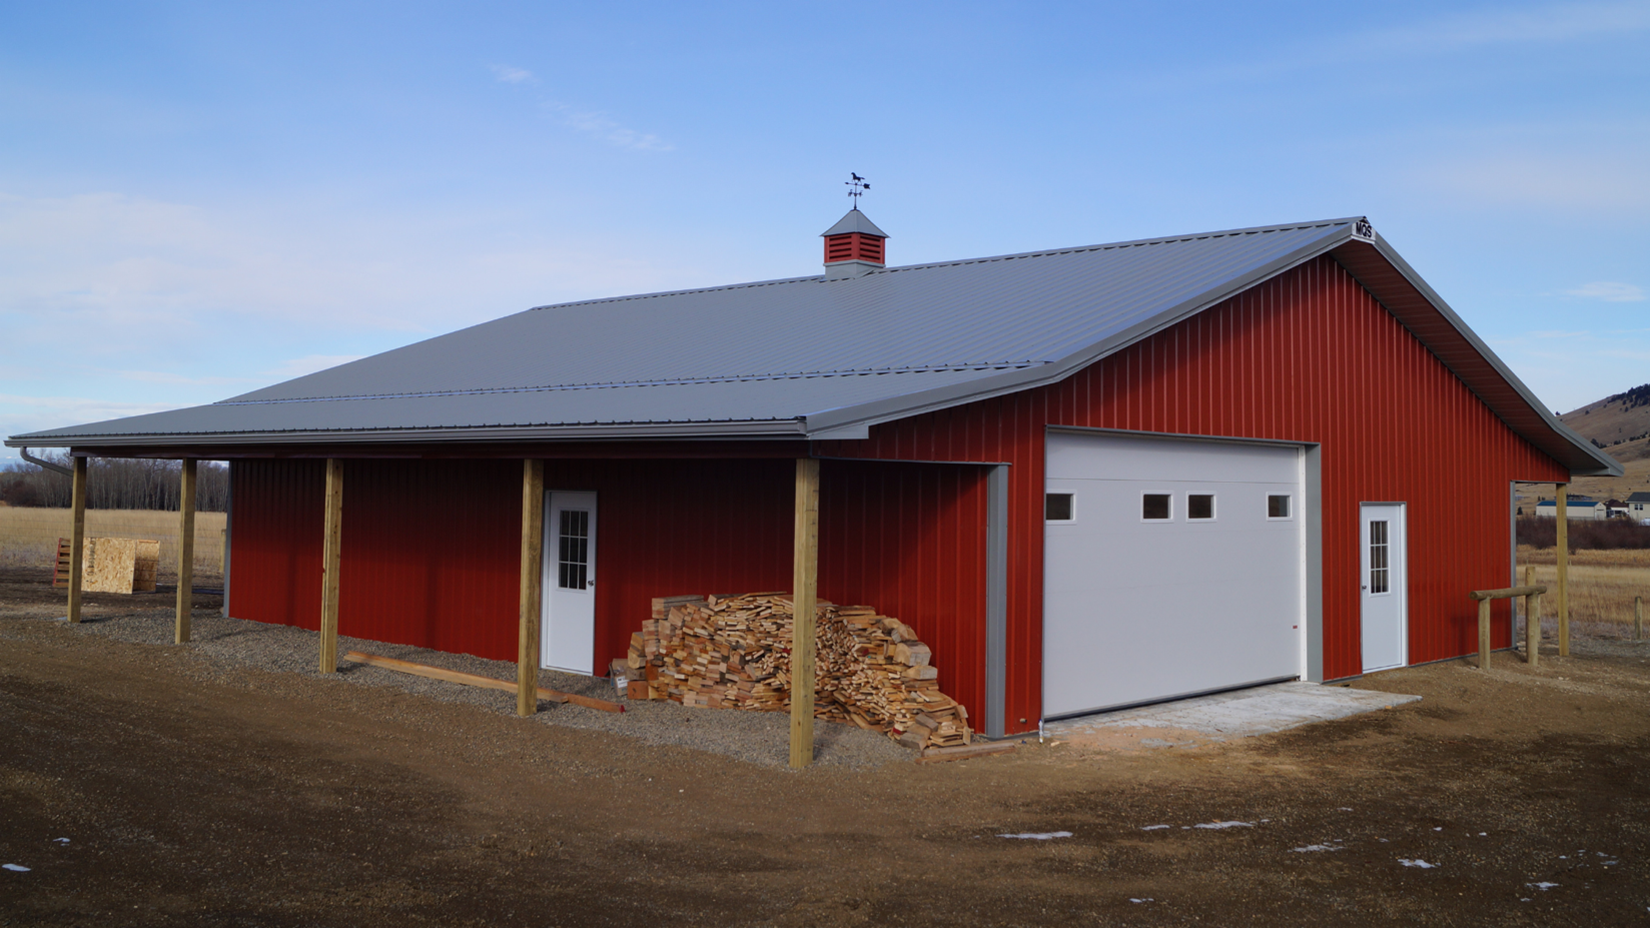 How to Choose the Right Doors for Your Barn